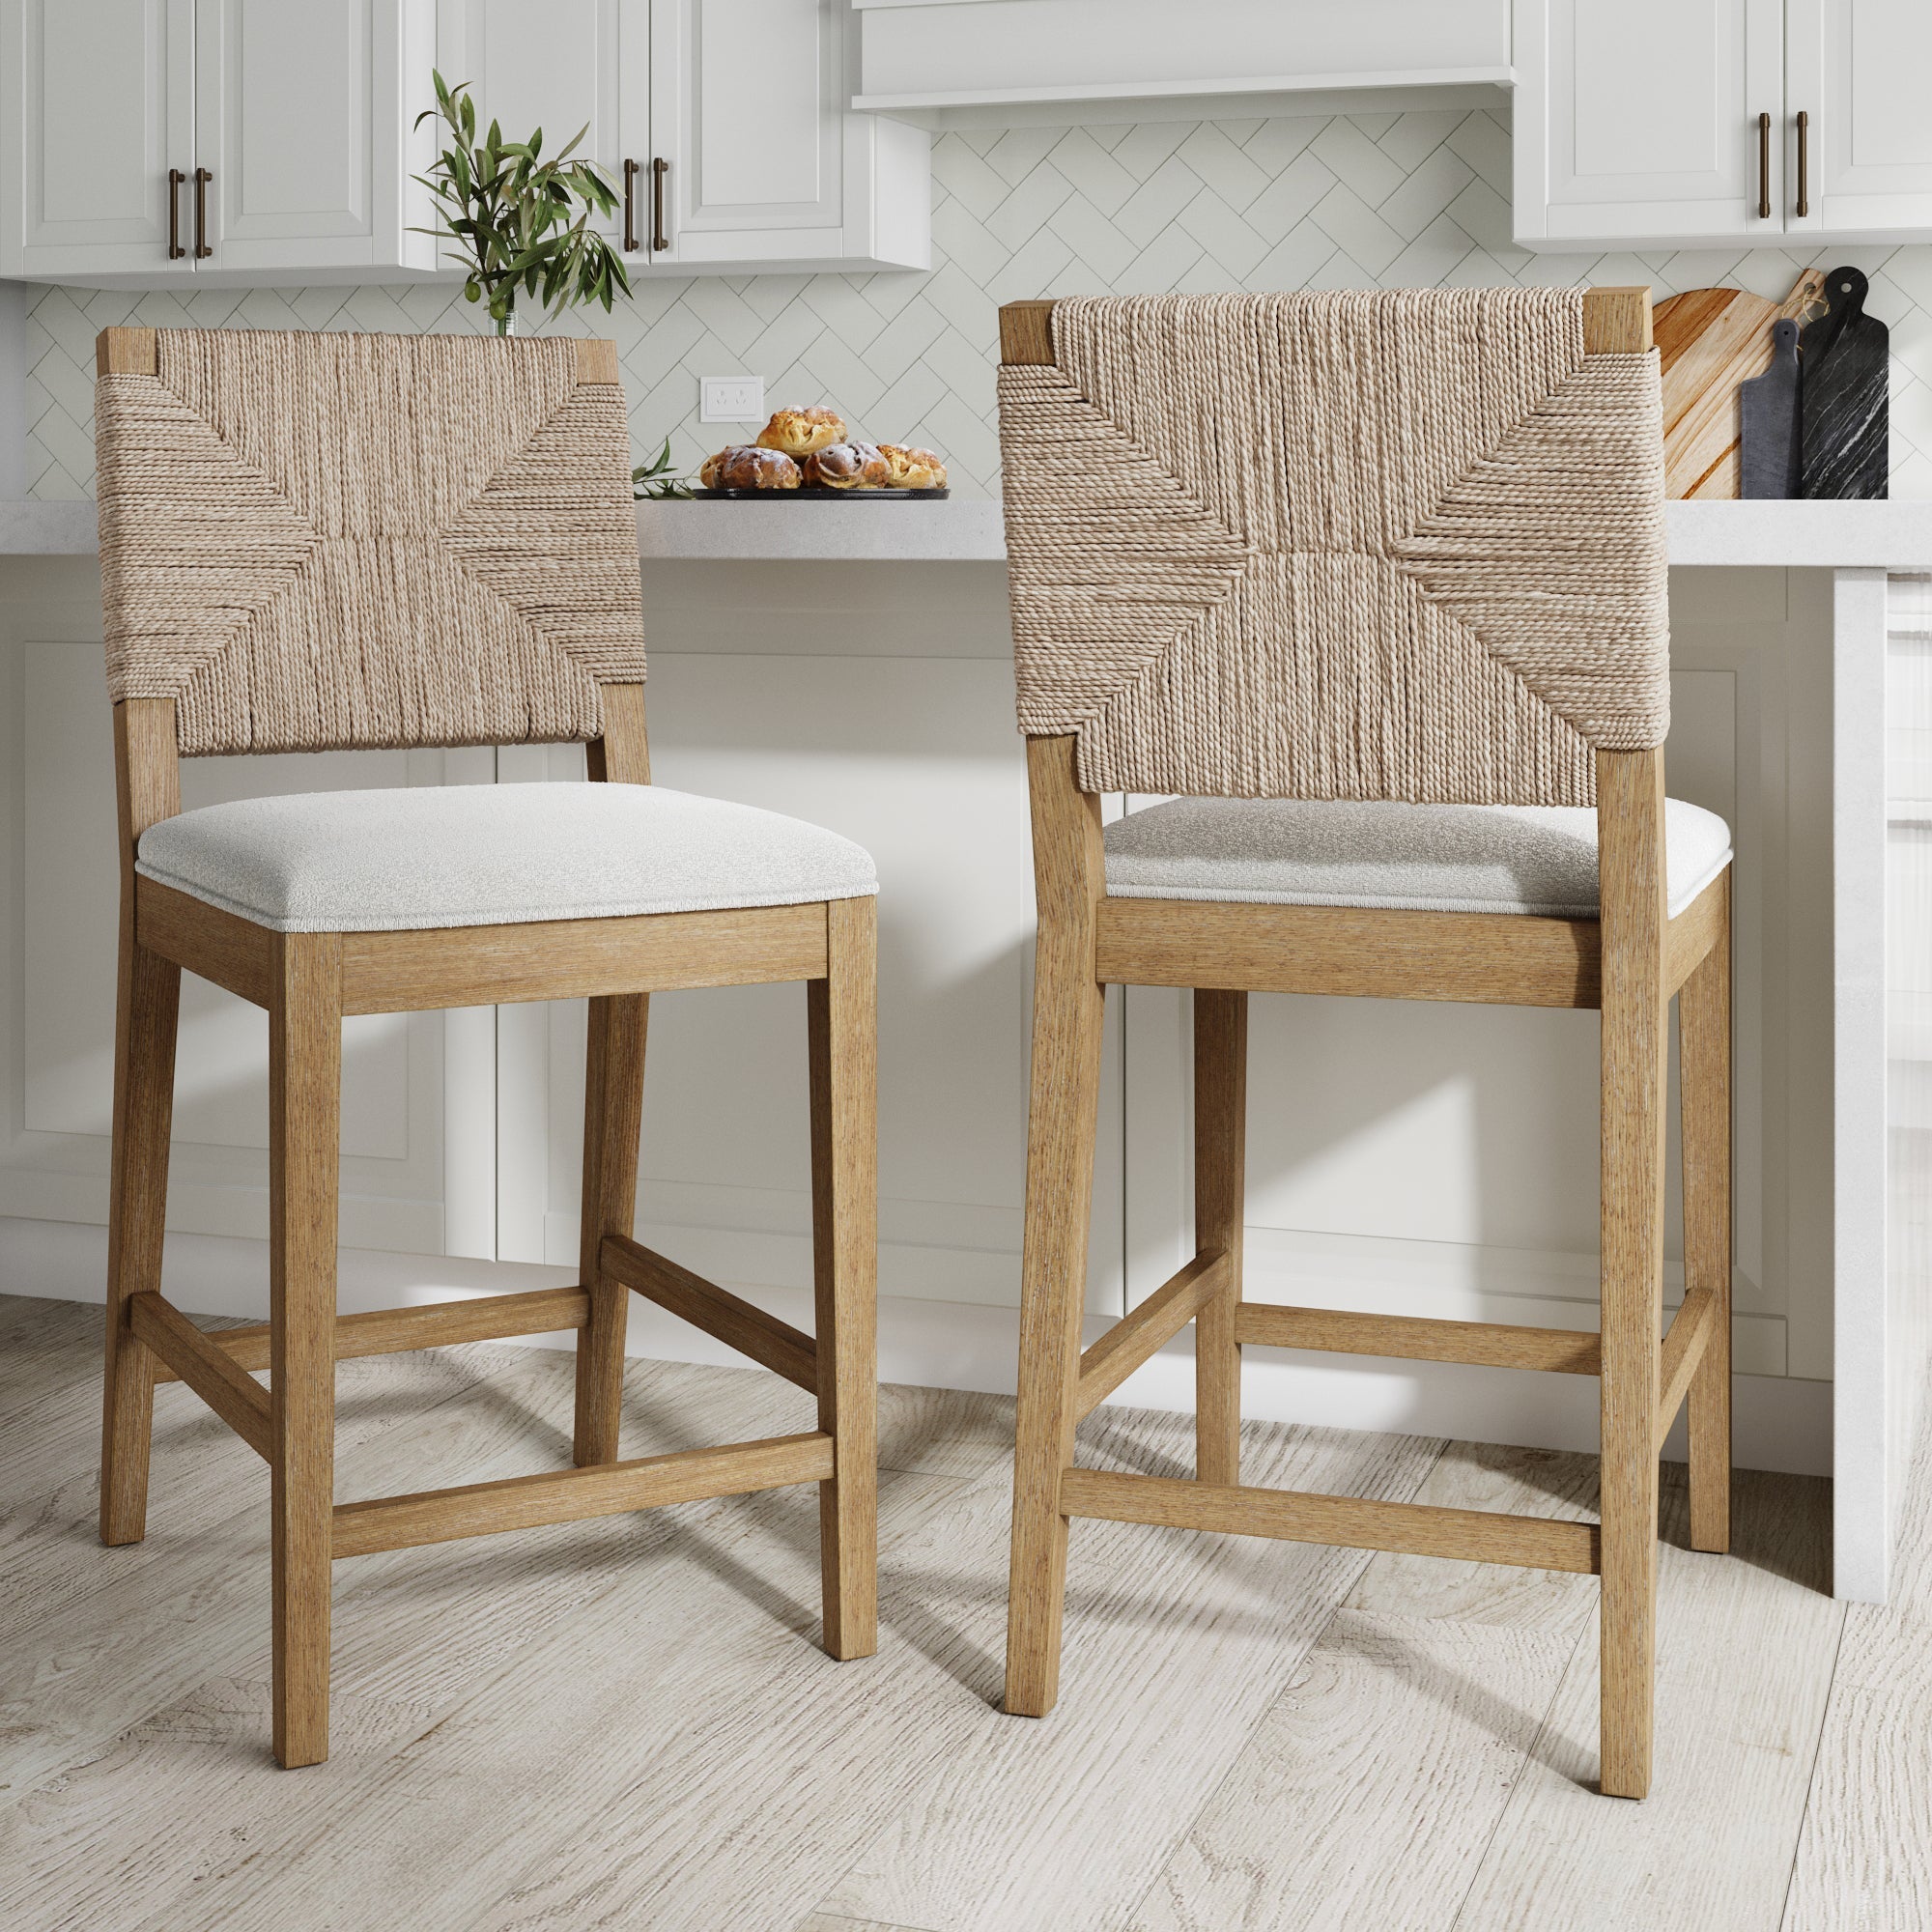 Set of 2 Seagrass Counter Height Bar Stools